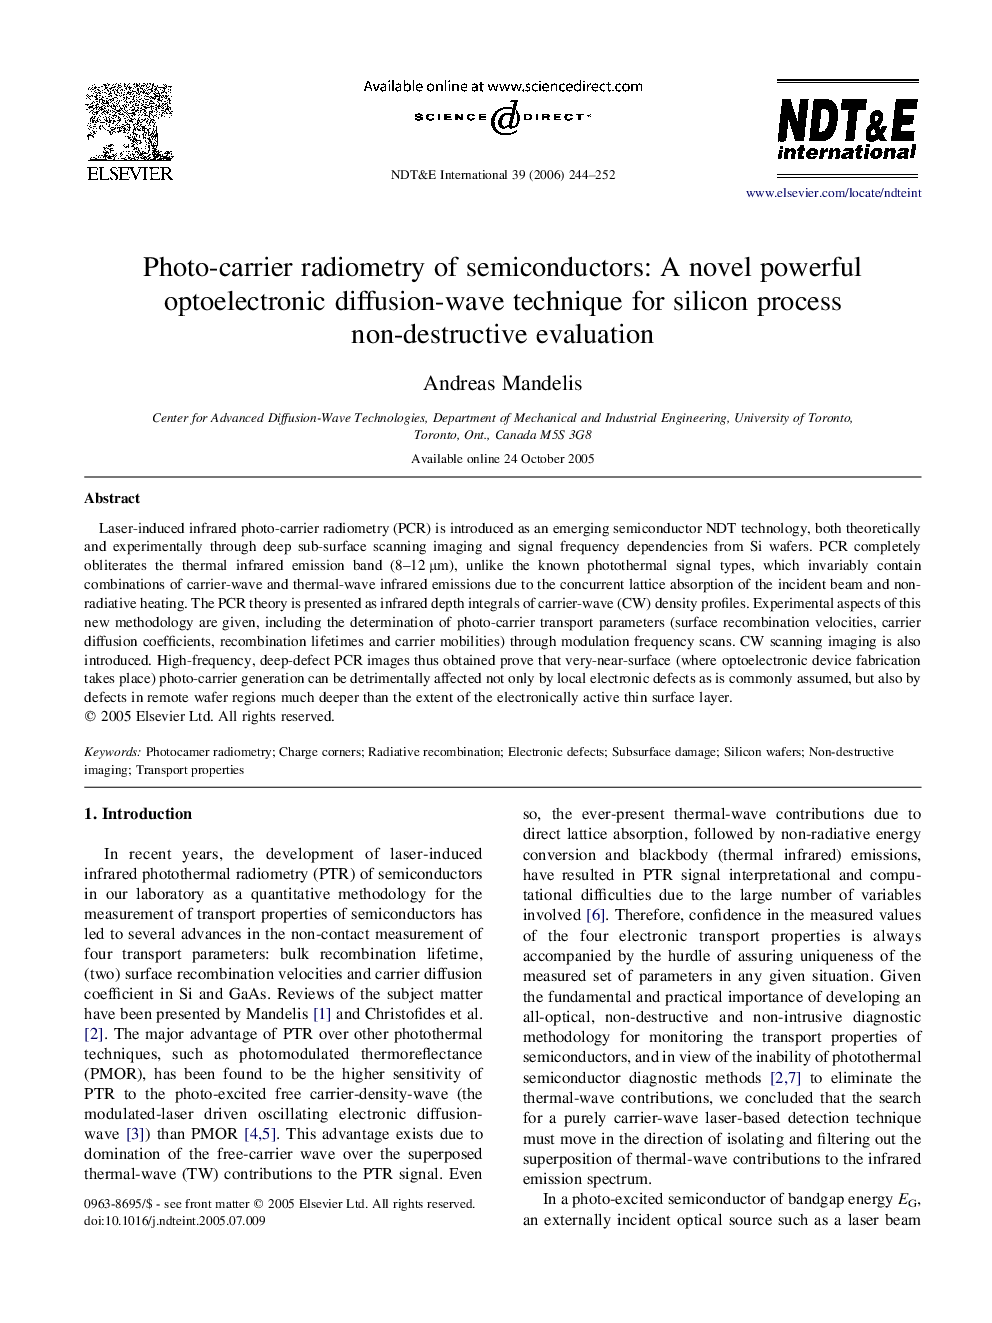 Photo-carrier radiometry of semiconductors: A novel powerful optoelectronic diffusion-wave technique for silicon process non-destructive evaluation